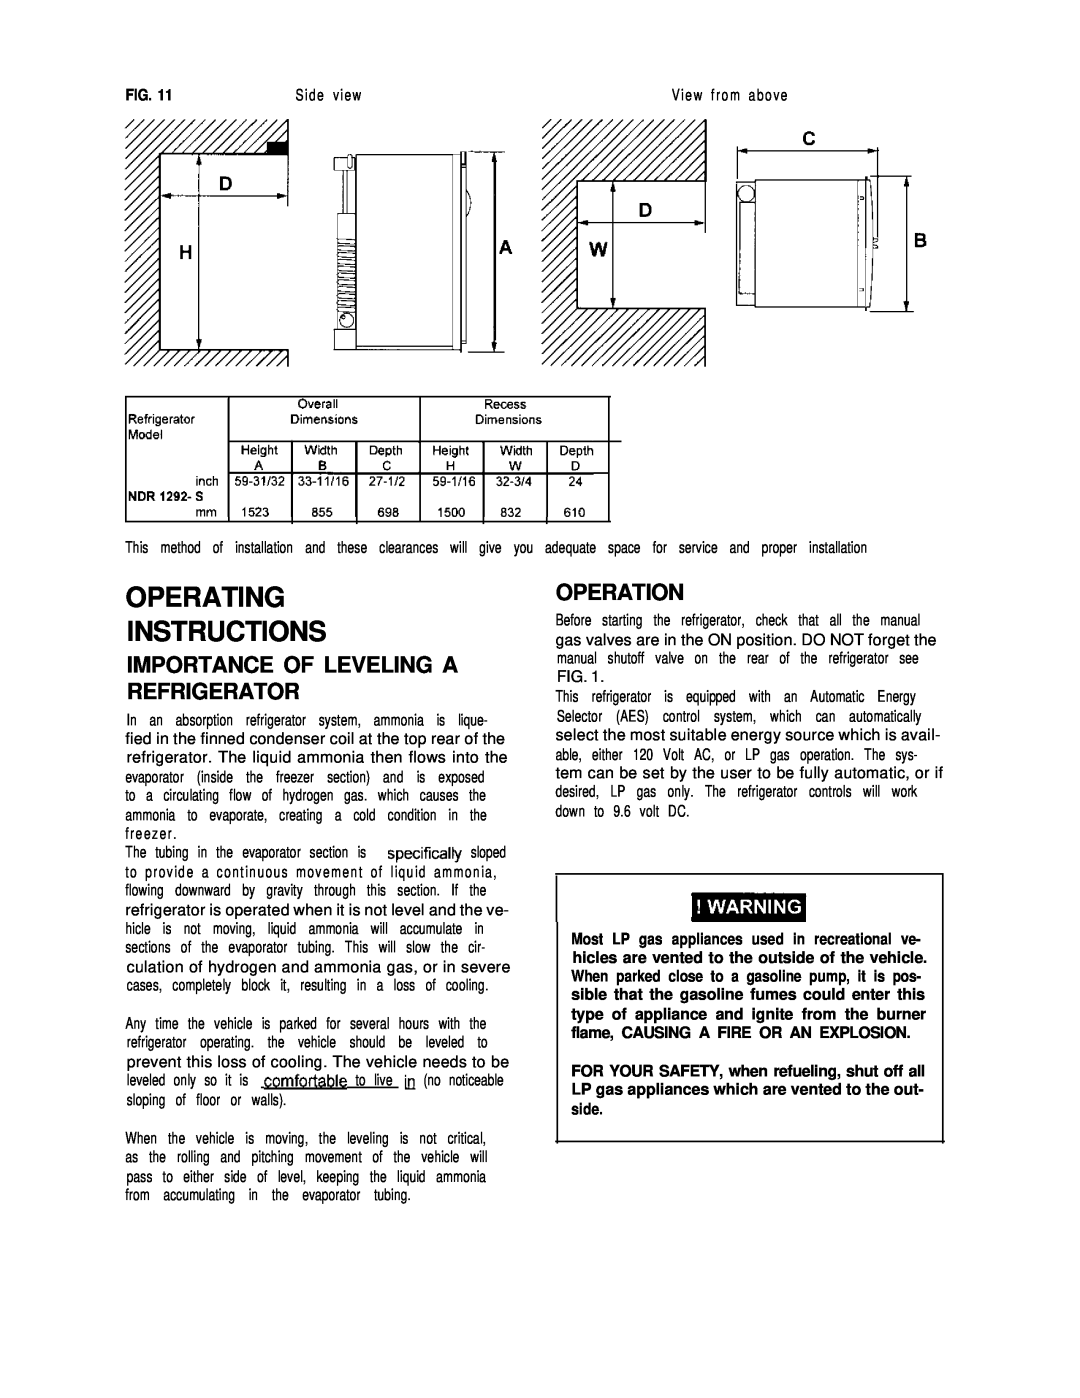 Dometic NDR1292-S dimensions Operating Instructions, Importance Of Leveling A Refrigerator, Operation 